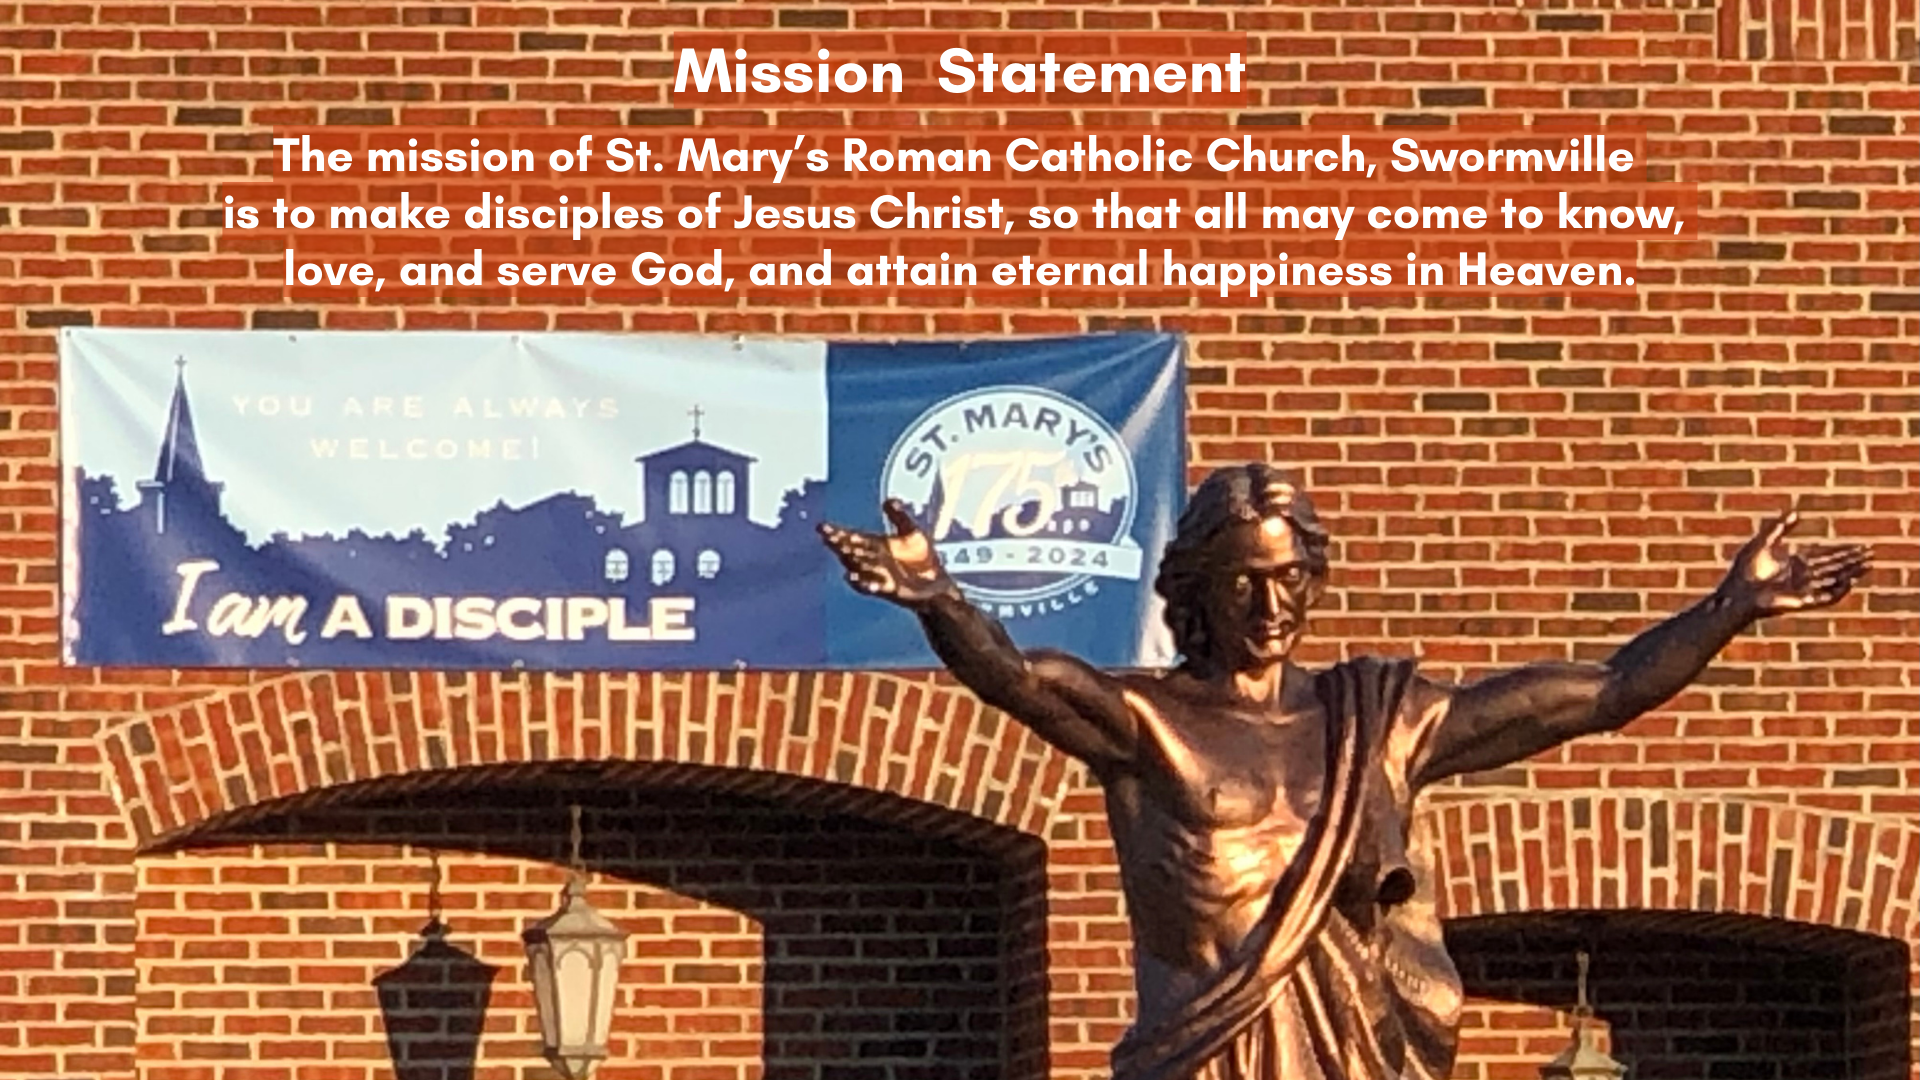 St. Mary's Parish Mission Statement with Welcoming Jesus statue